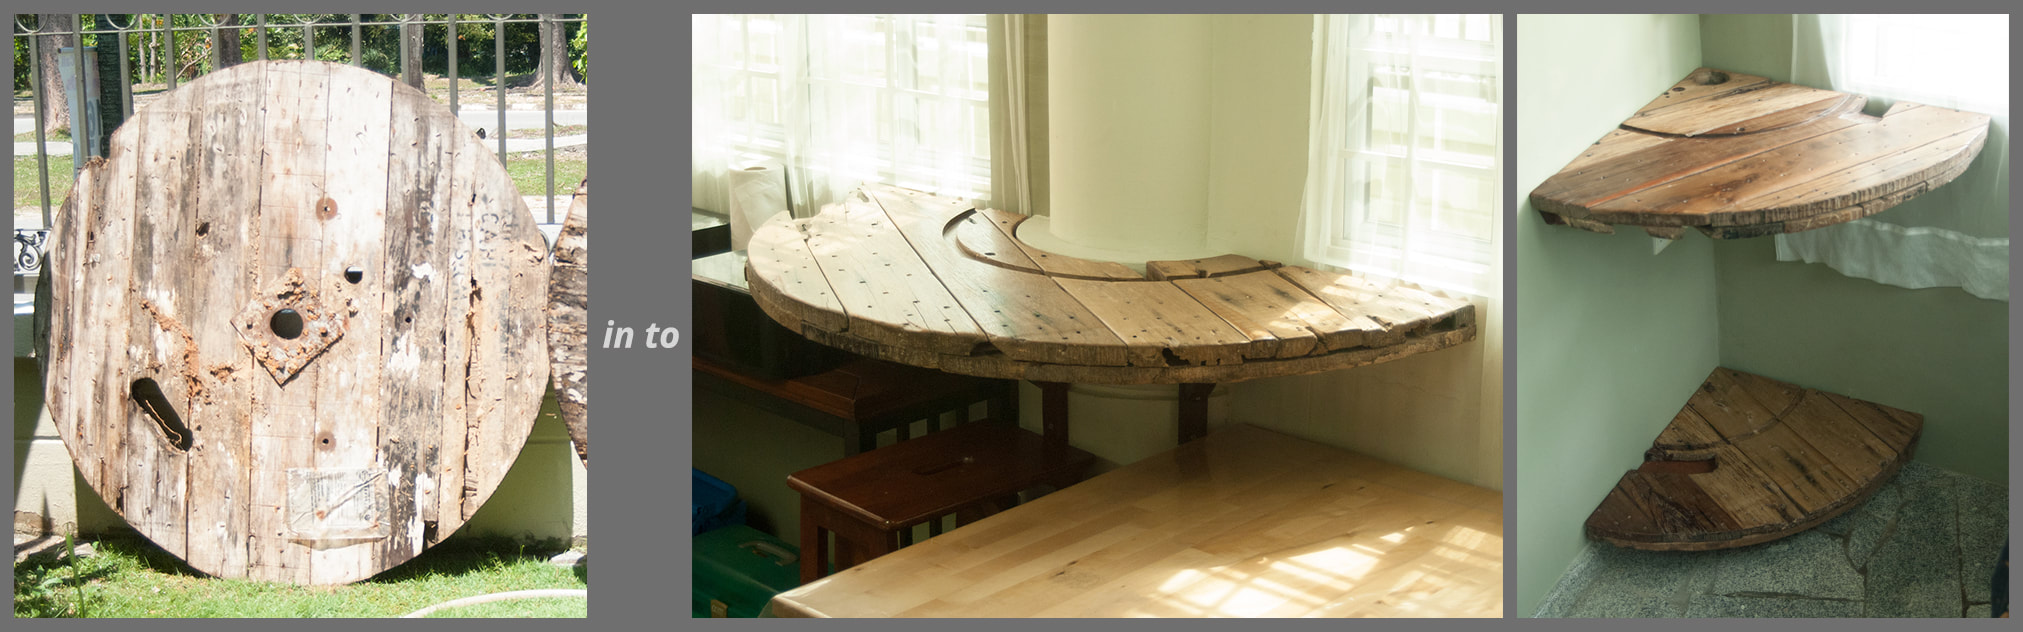 DIY Reclaimed Wood Cable Reel into Floating Table Furniture